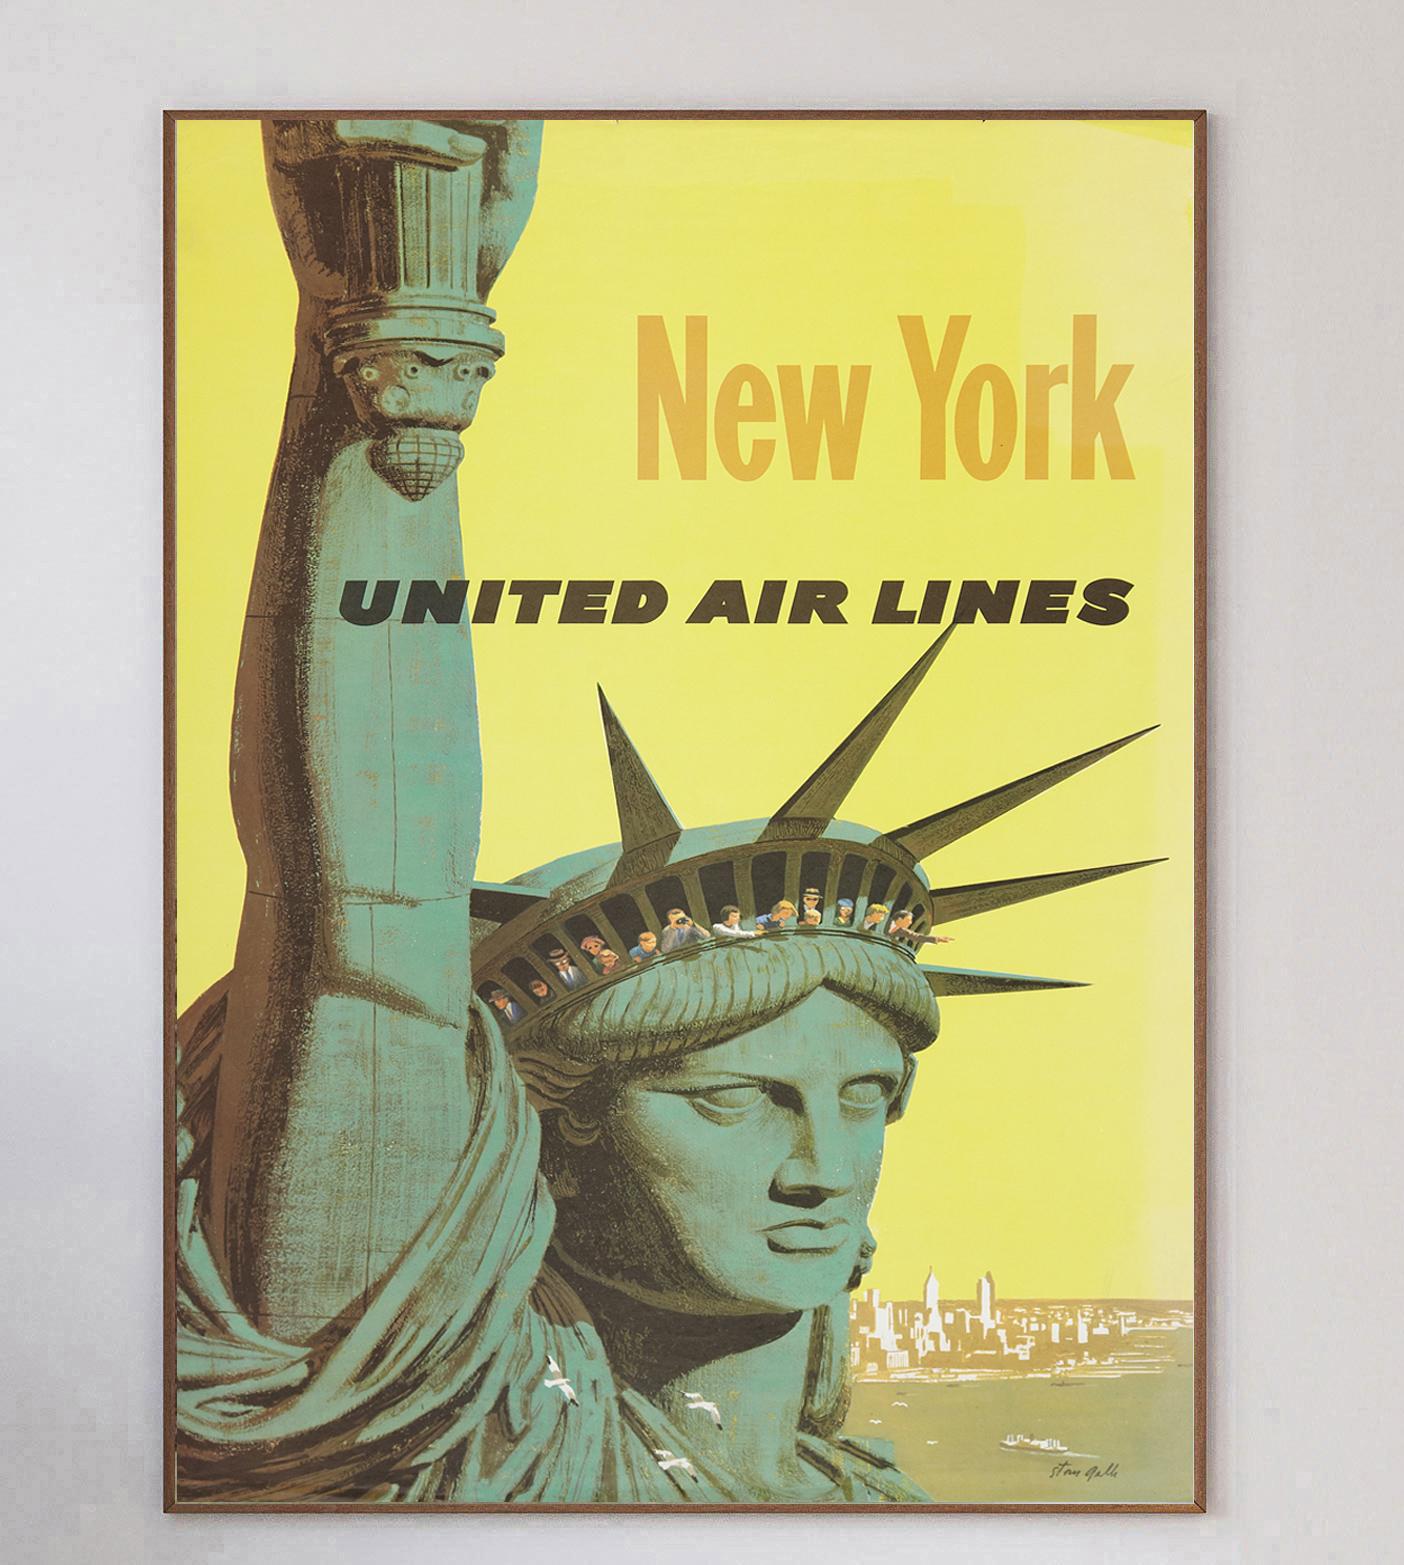 With artwork from the great poster designer and illustrator Stan Galli, this stunning and rare poster from 1960 promotes United Airlines routes to Las Vegas. Depicting the Statue of Liberty in a colourful scene, this wonderful design is typical of